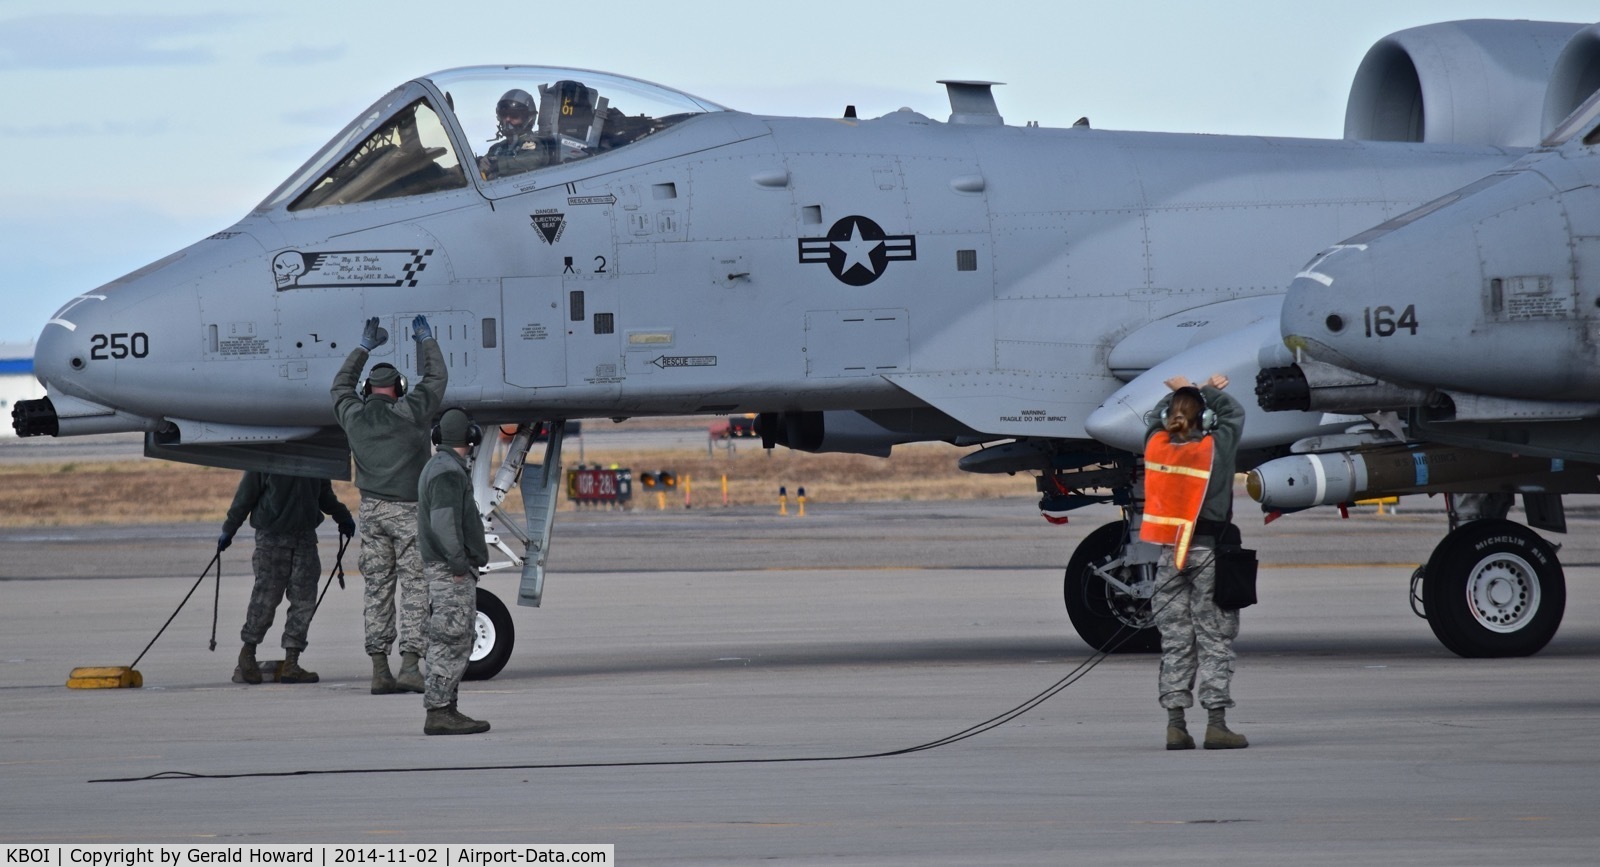 Boise Air Terminal/gowen Fld Airport (BOI) - A-10C from the 190th Fighter Sq., 124th Fighter Wing stopped on the east Arm/De arm pad for final pre flight checks.